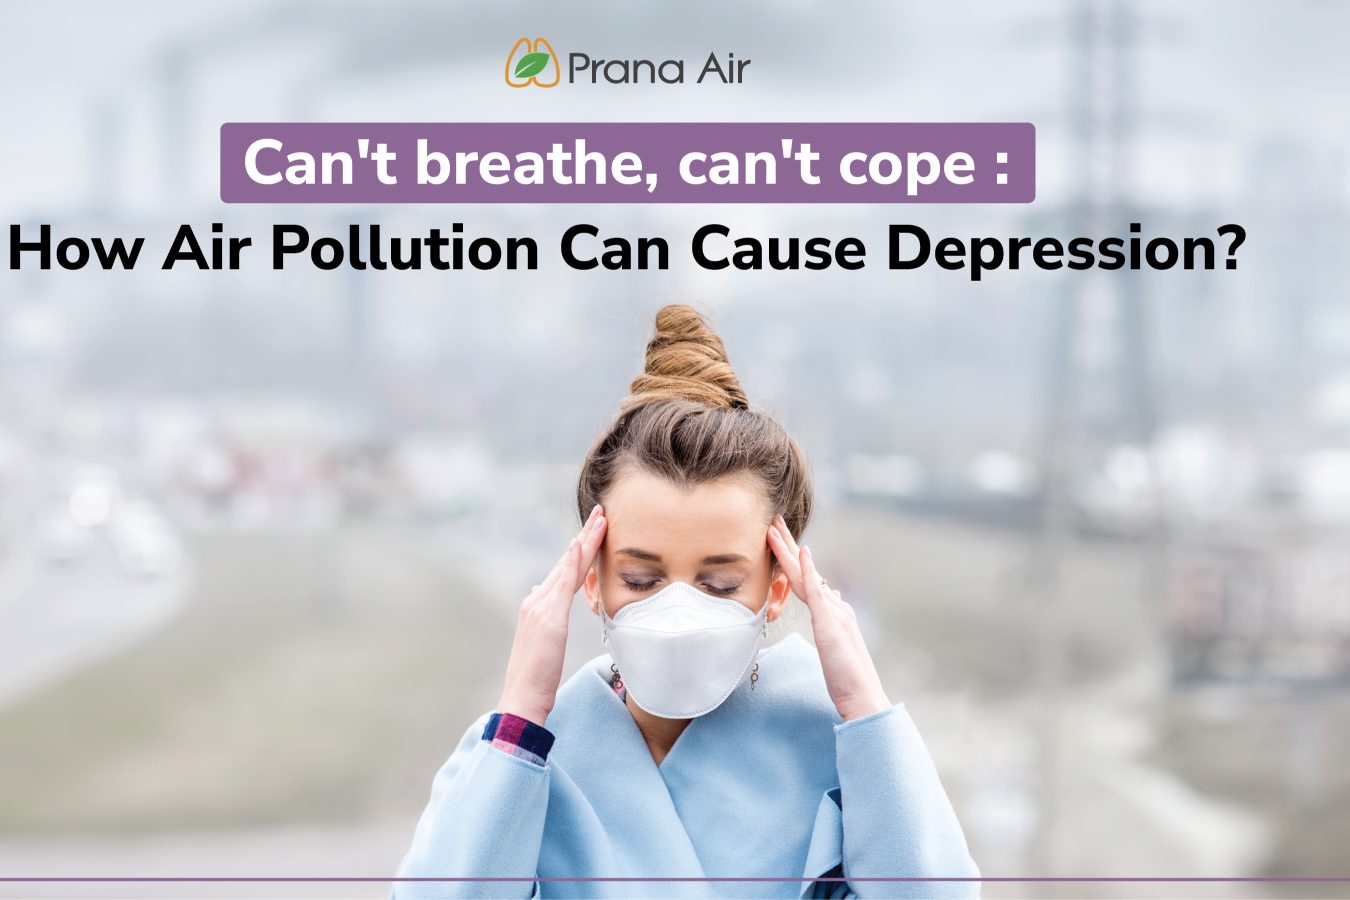 Air pollution can cause depression 